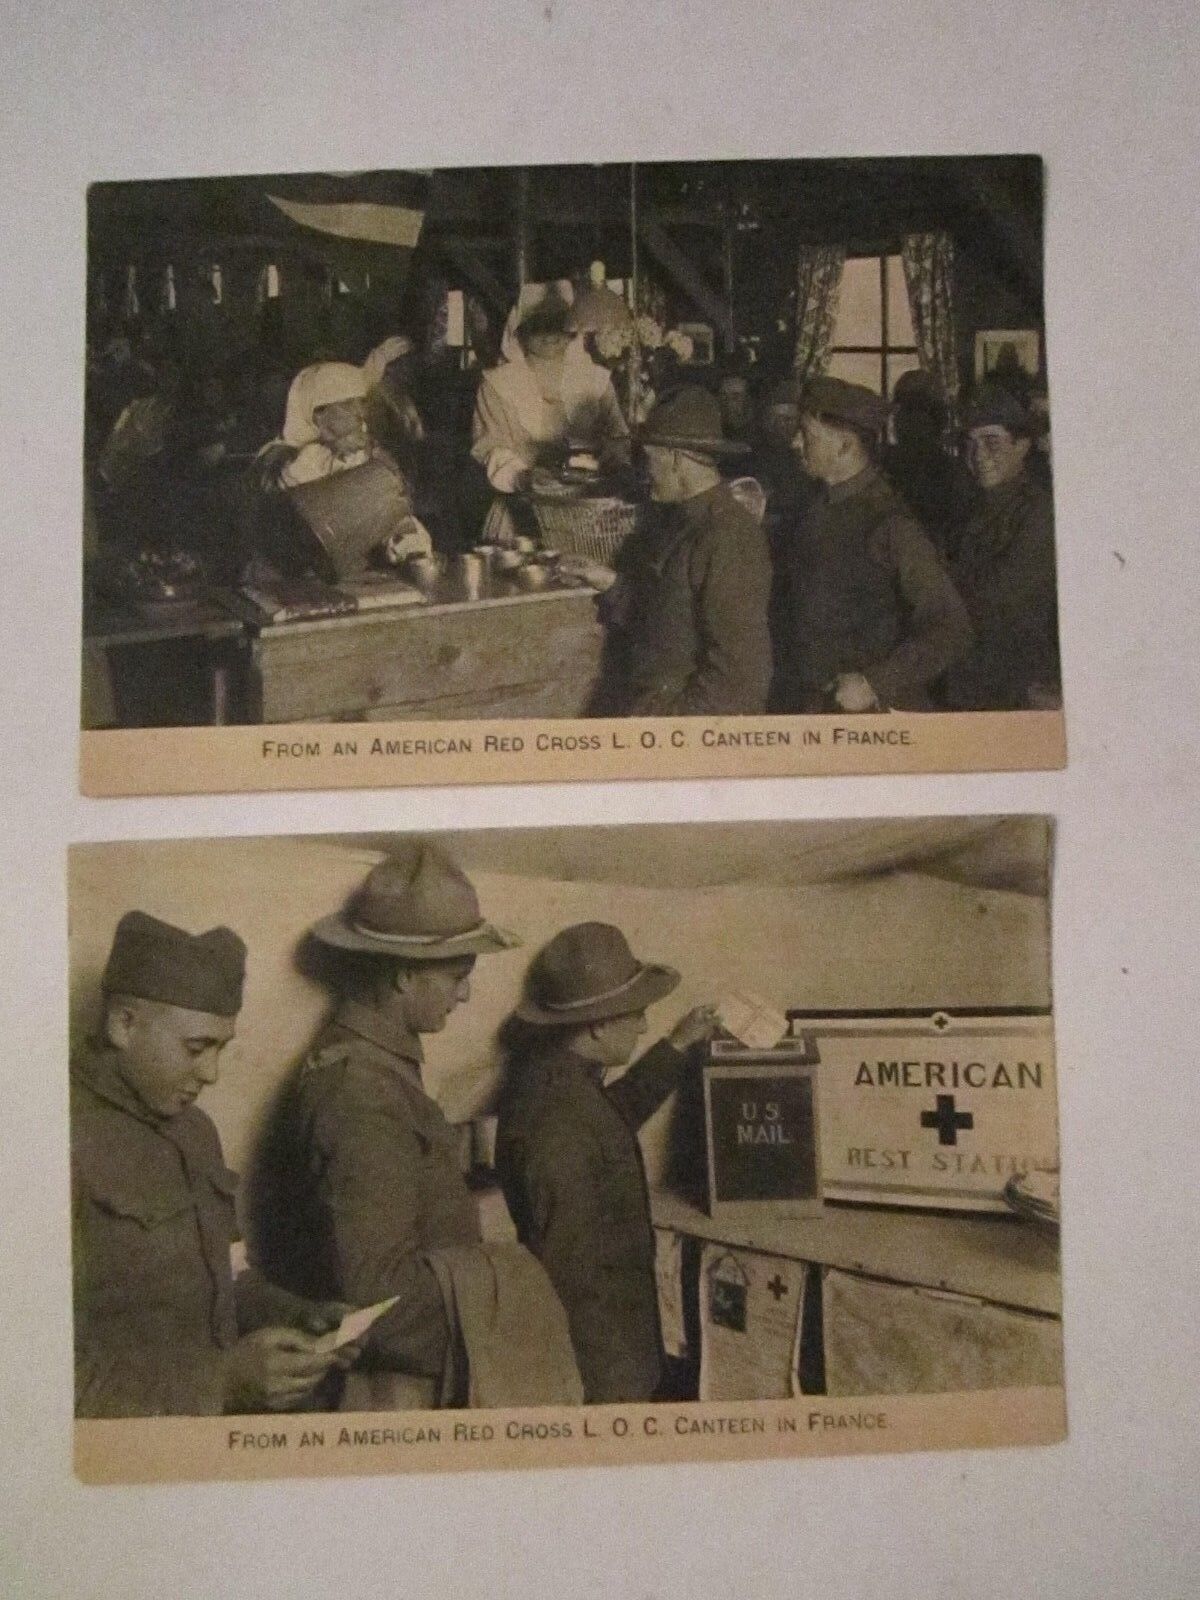 (9) WWI POSTCARDS - PUBLISHED BY THE AMERICAN RED CROSS - UNUSED - TUB BBA-6